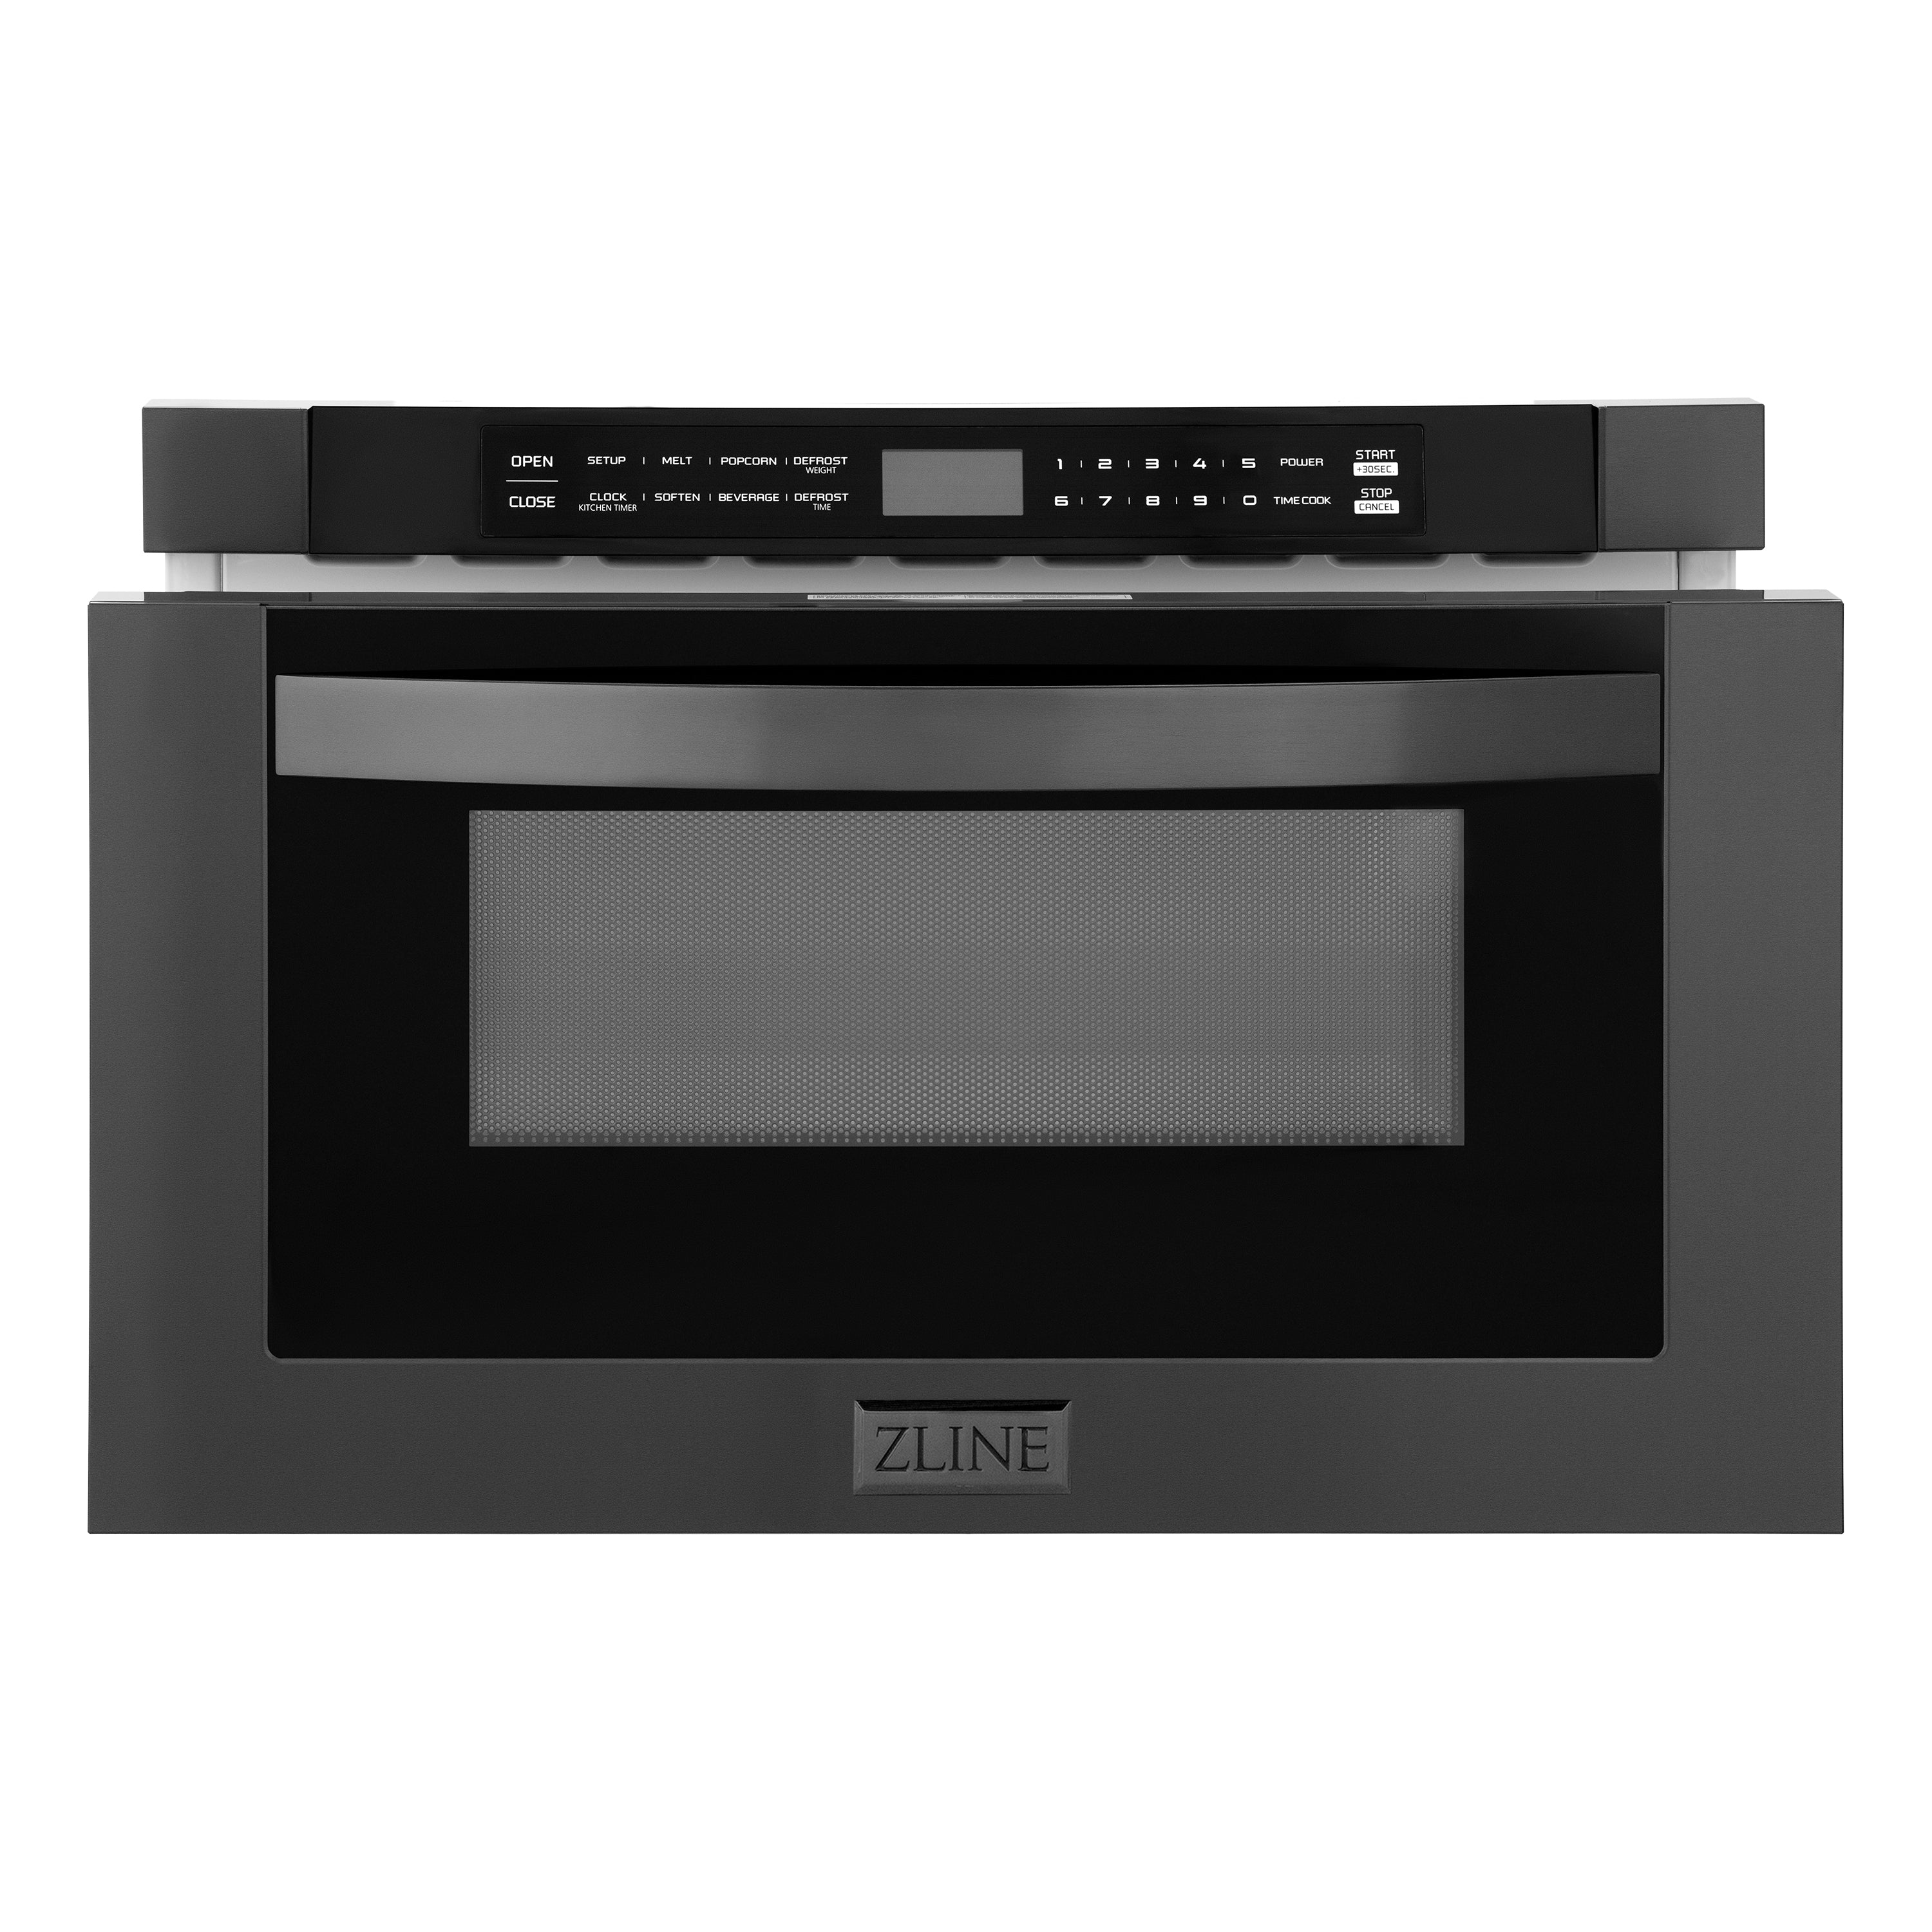 ZLINE 24" Black Stainless Steel Built-in Microwave Drawer (MWD-1-BS) Front, Drawer Open.